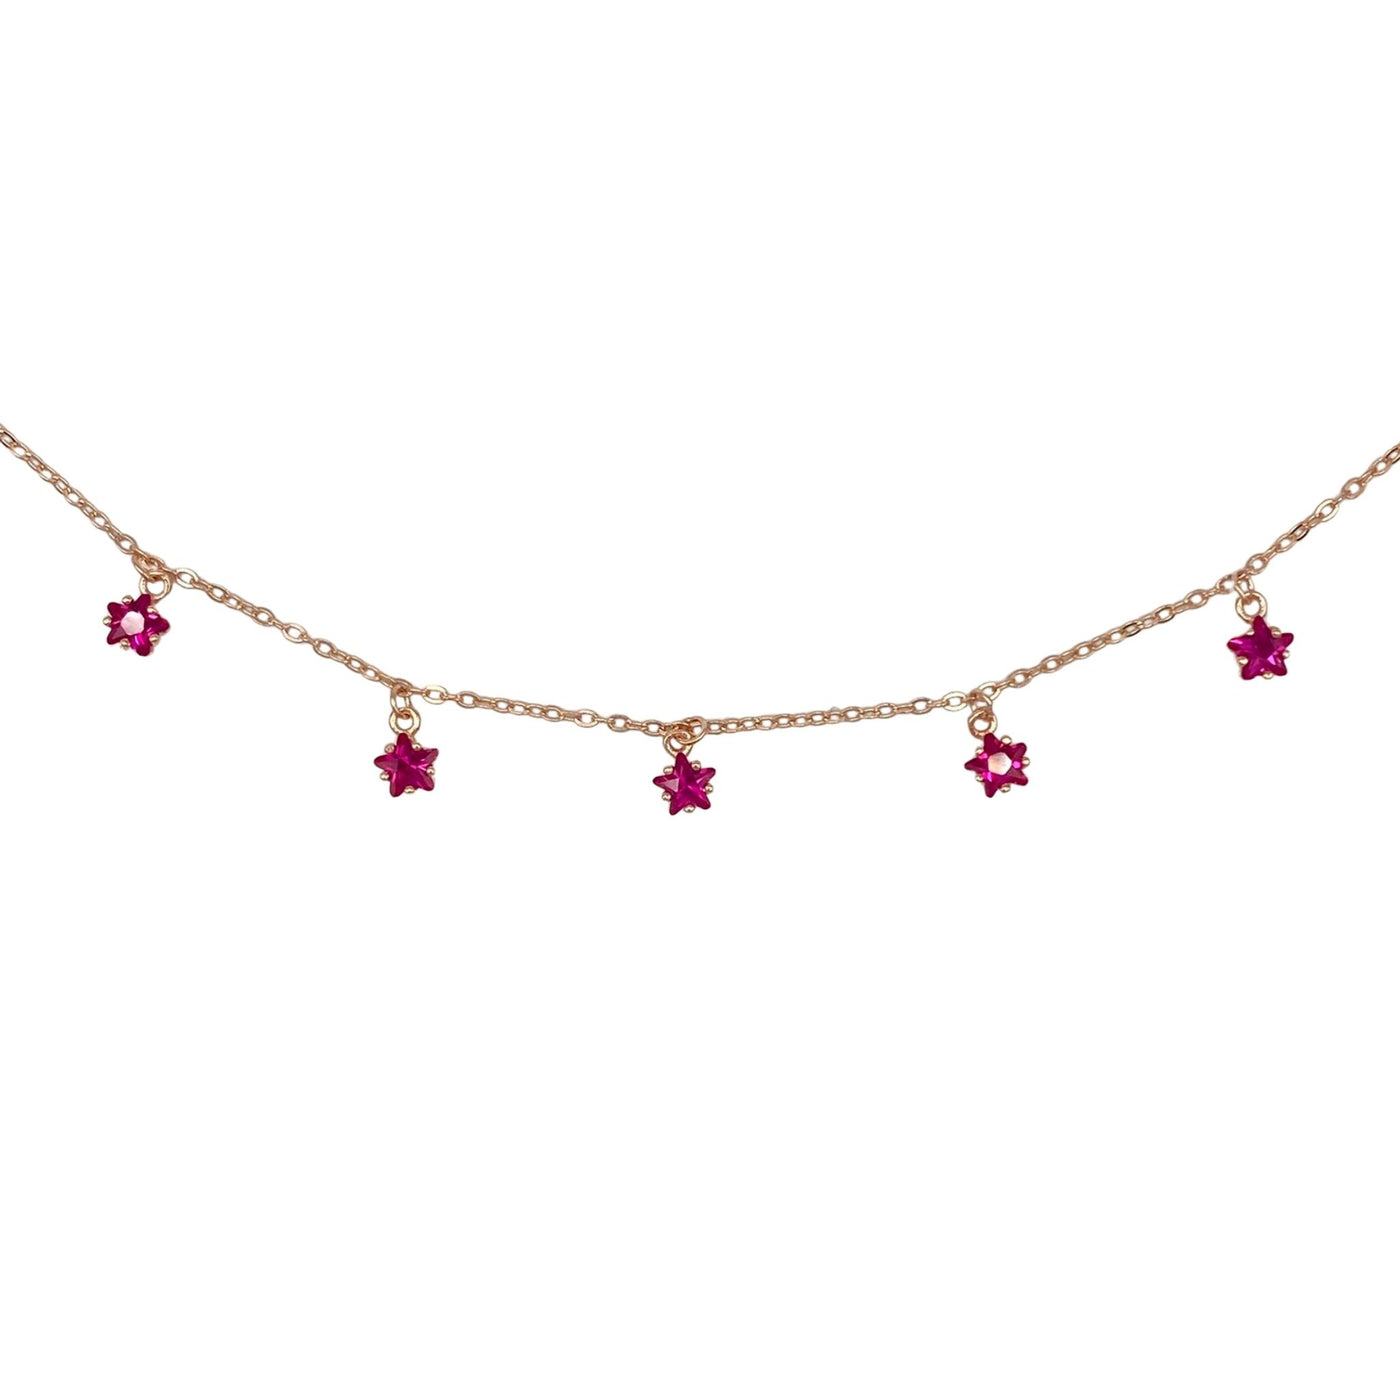 Silver necklace with ruby stars charms